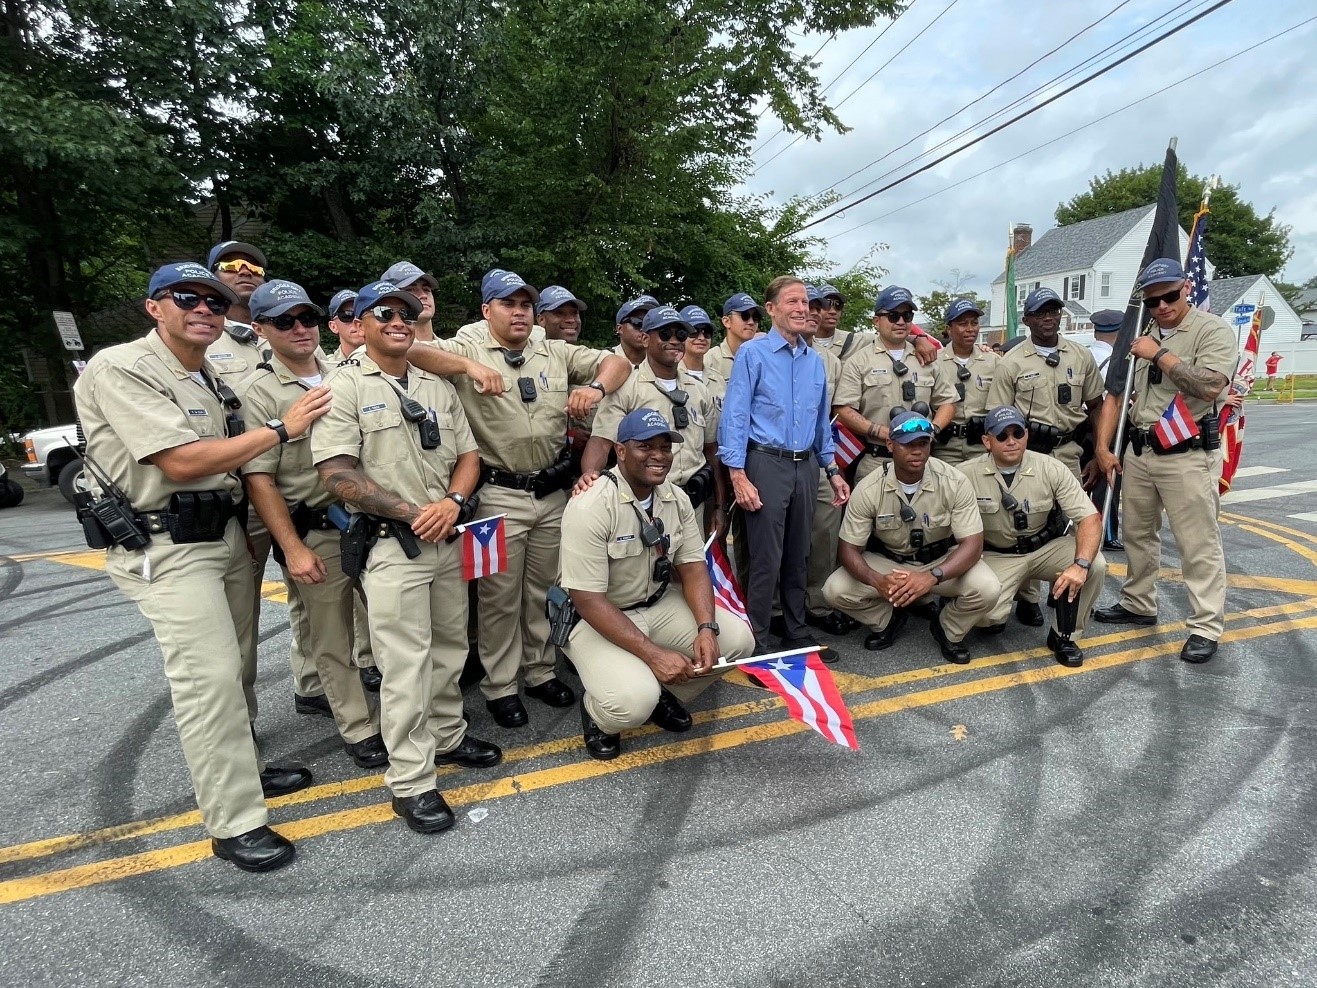 Blumenthal marched in the East Hampton Old Home Day and Bridgeport Puerto Rican Day Parades.